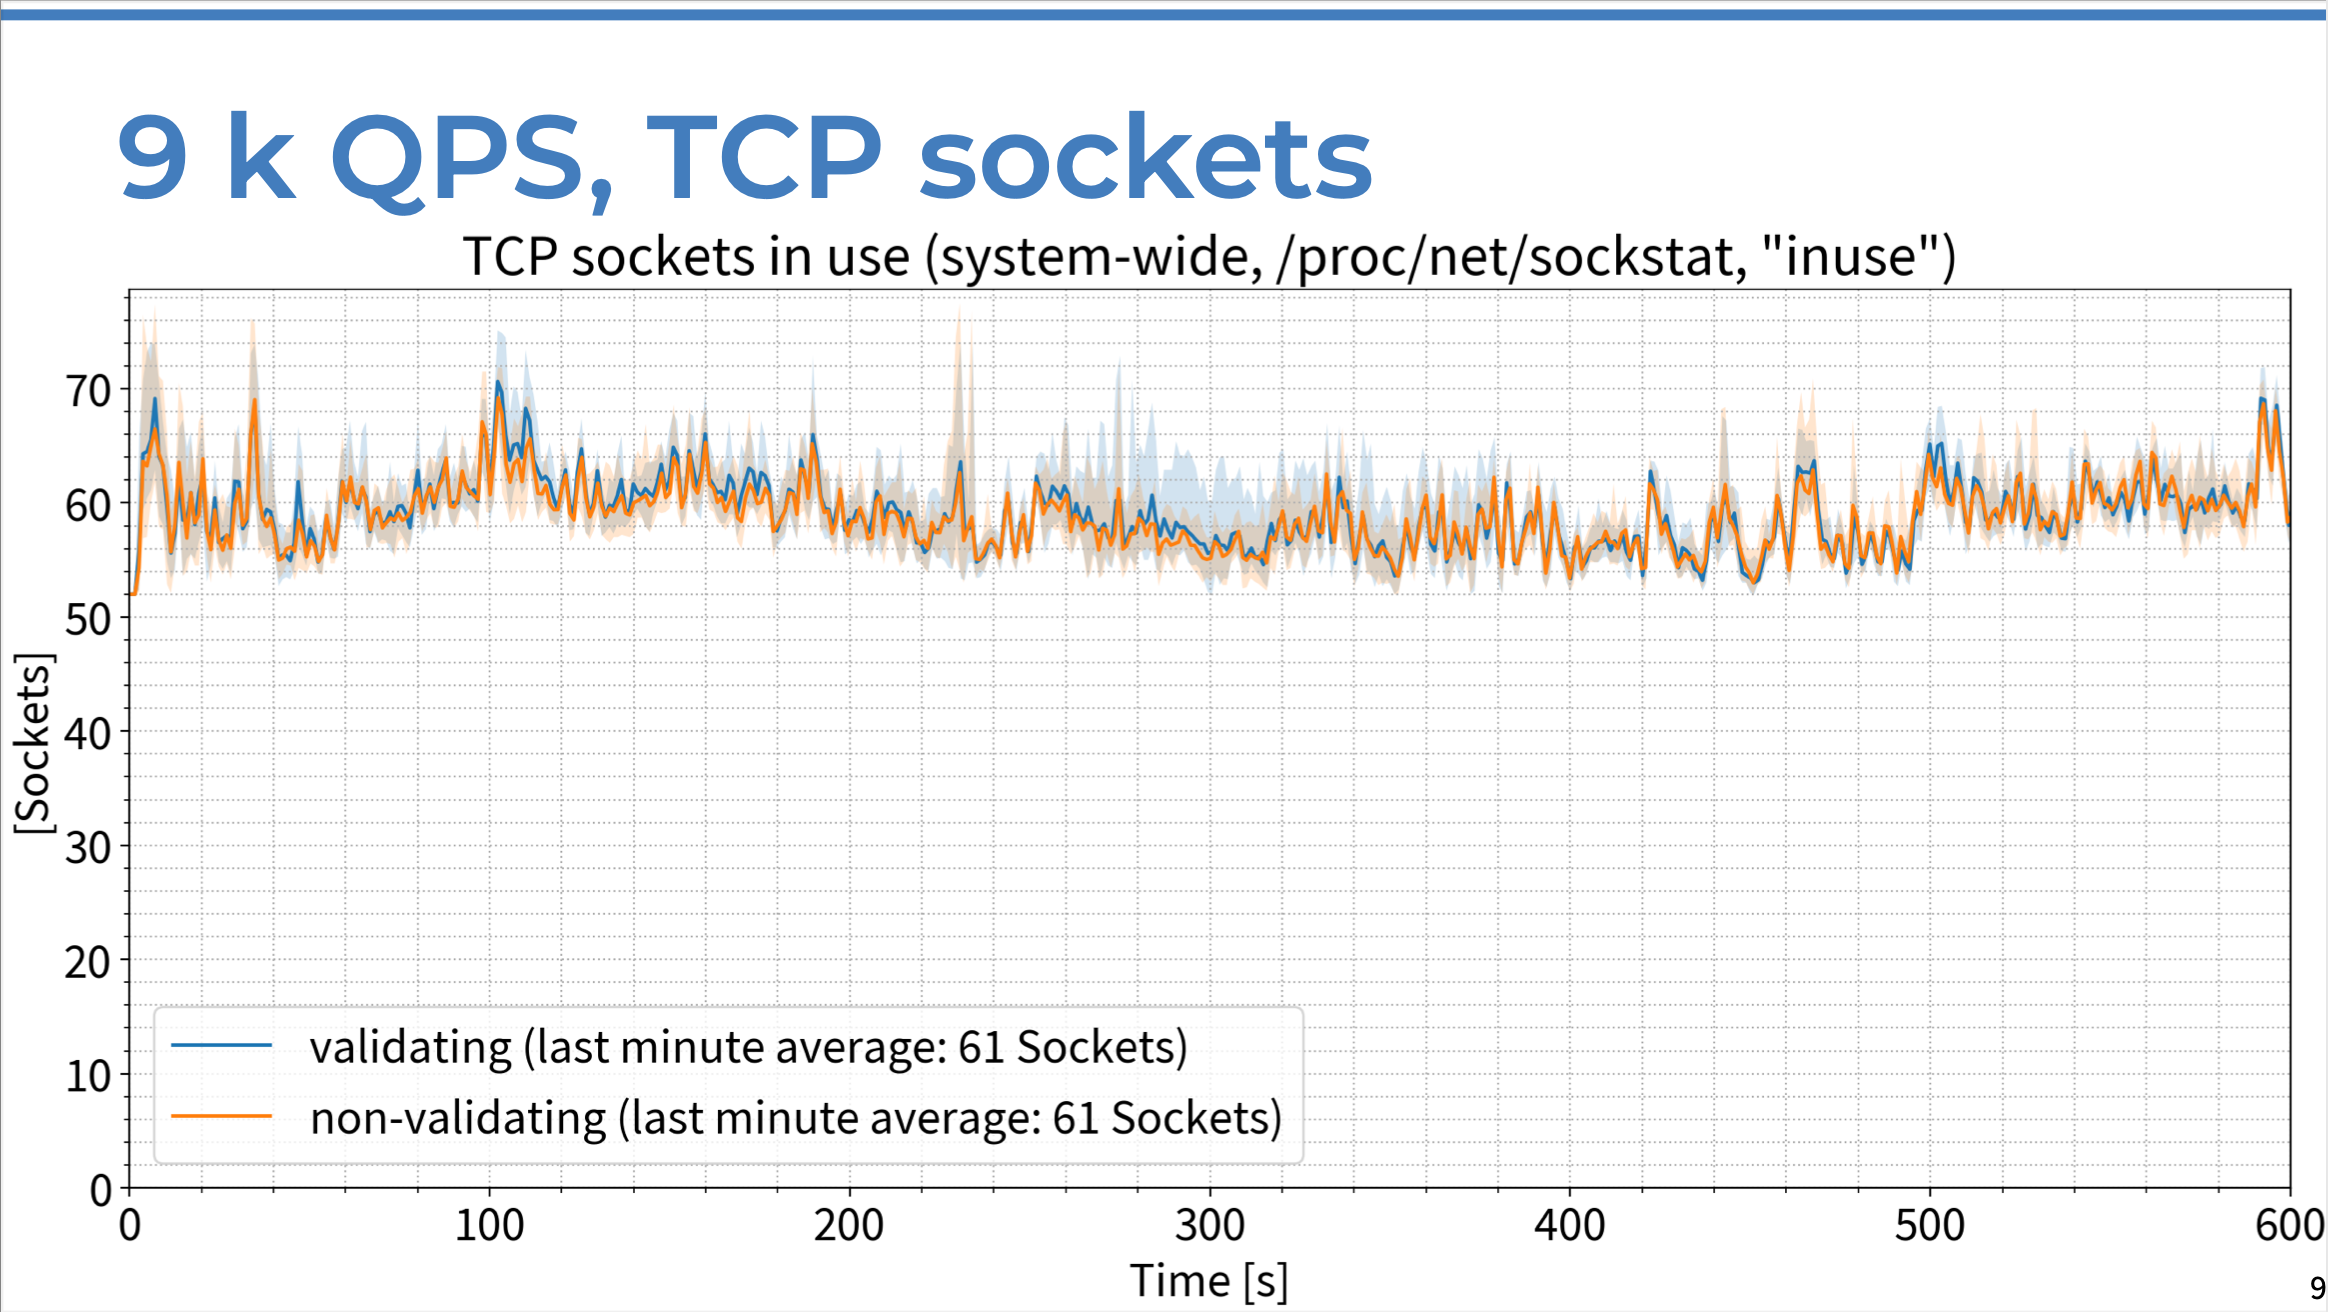 Chart of TCP sockets in use vs. time in seconds, comparing DNSSEC-validating resolver response to non-validating server response with 9K QPS.